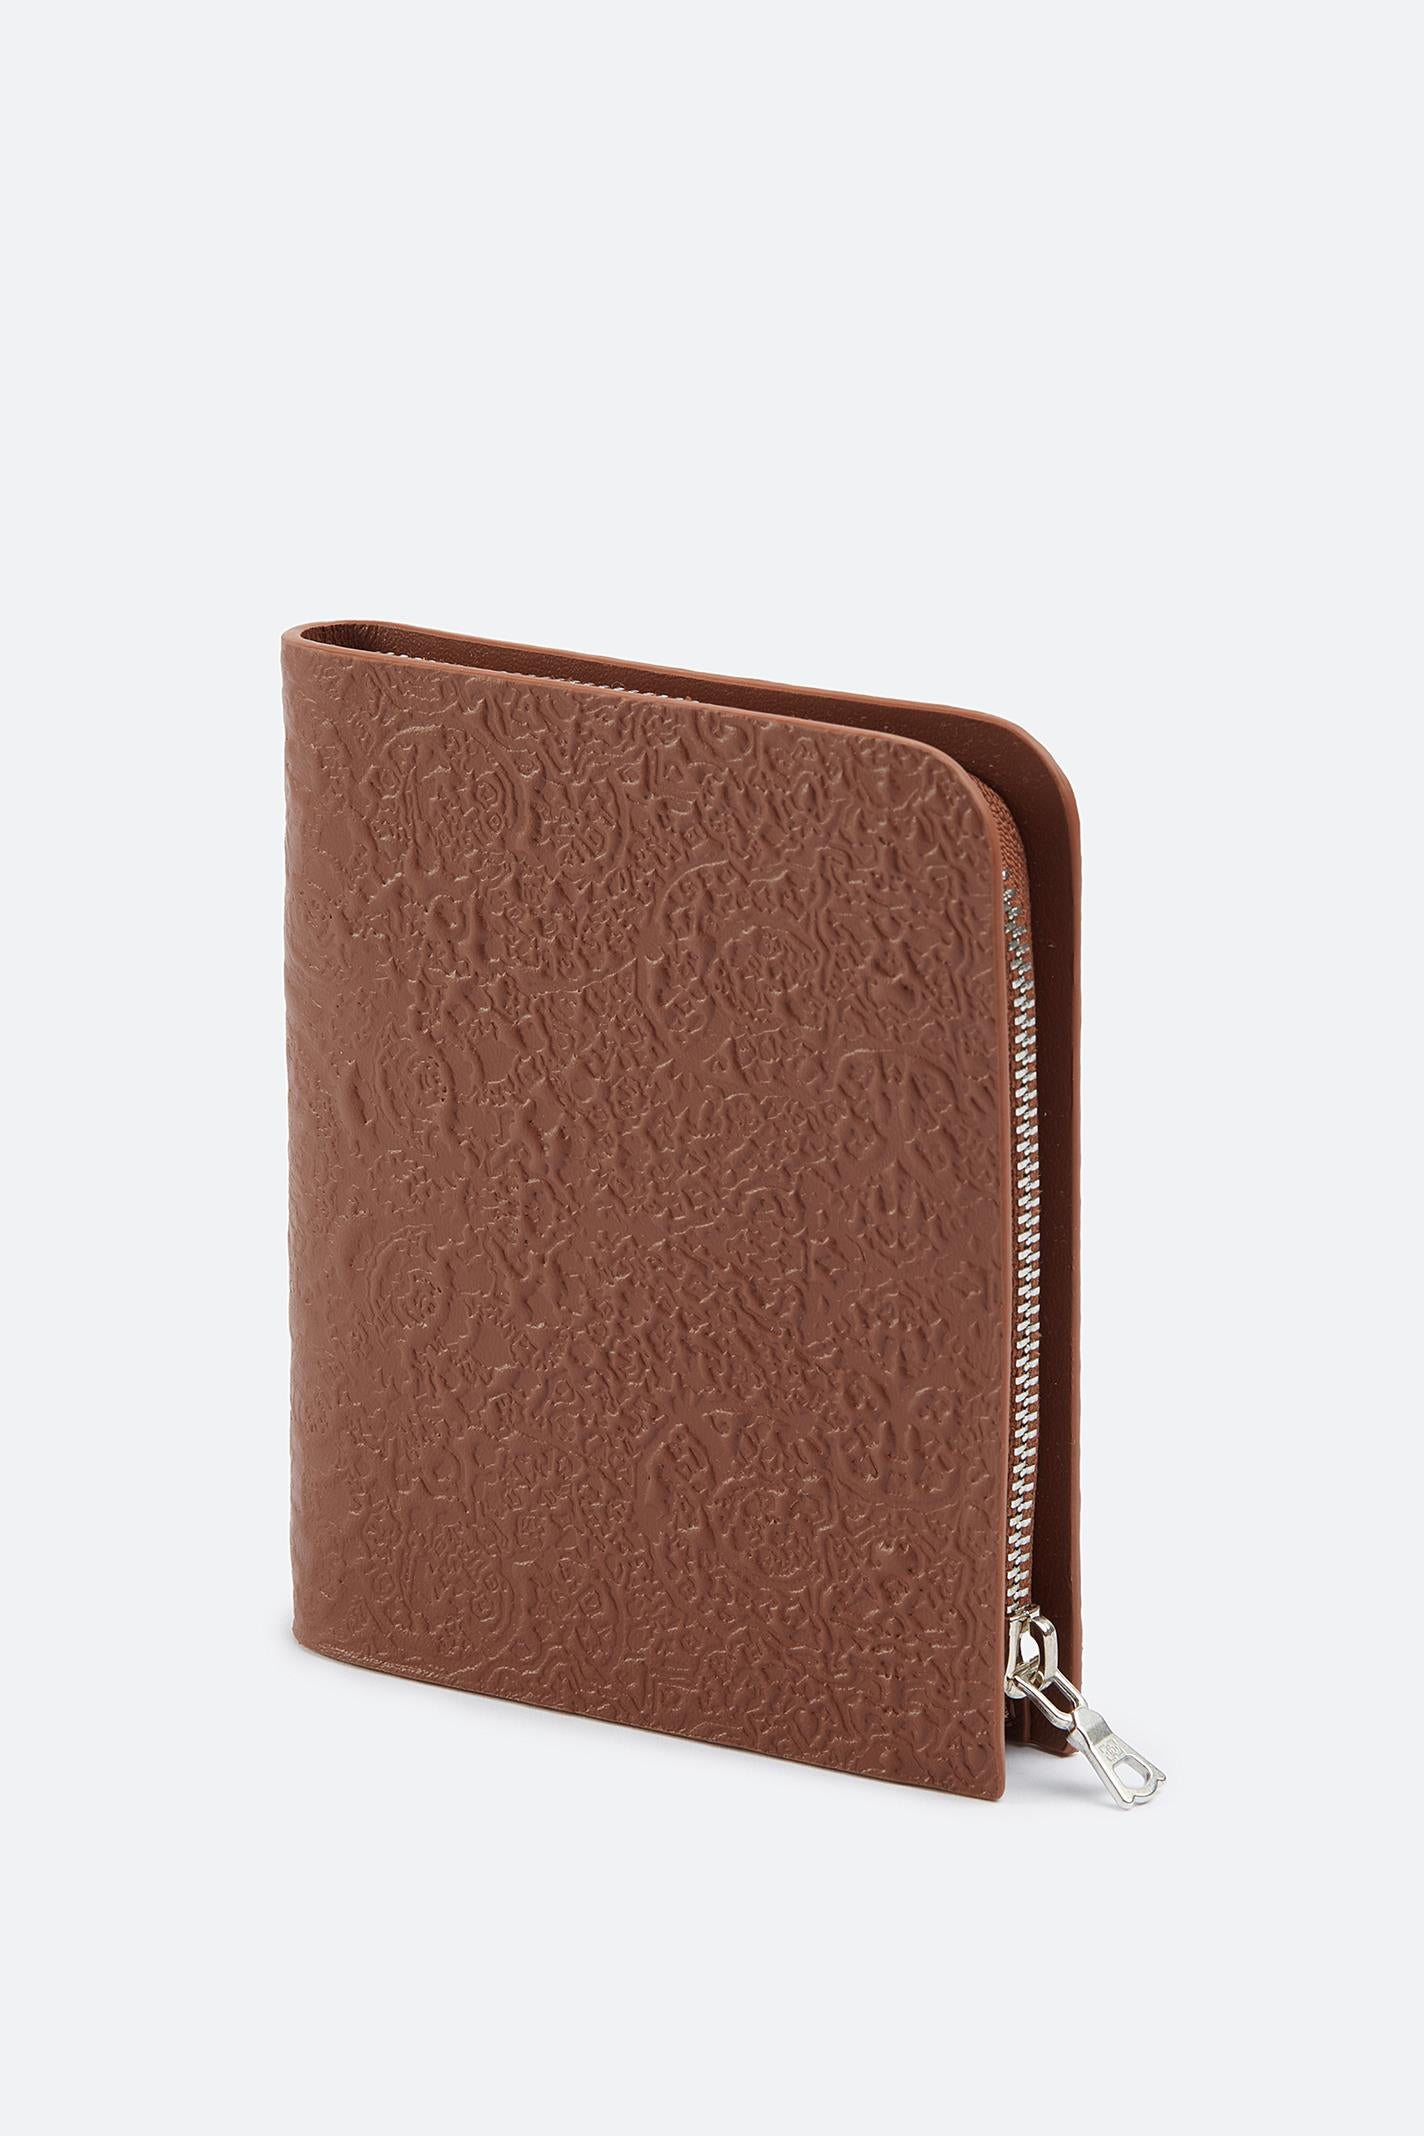  LARGE ZIPPED WALLET 011